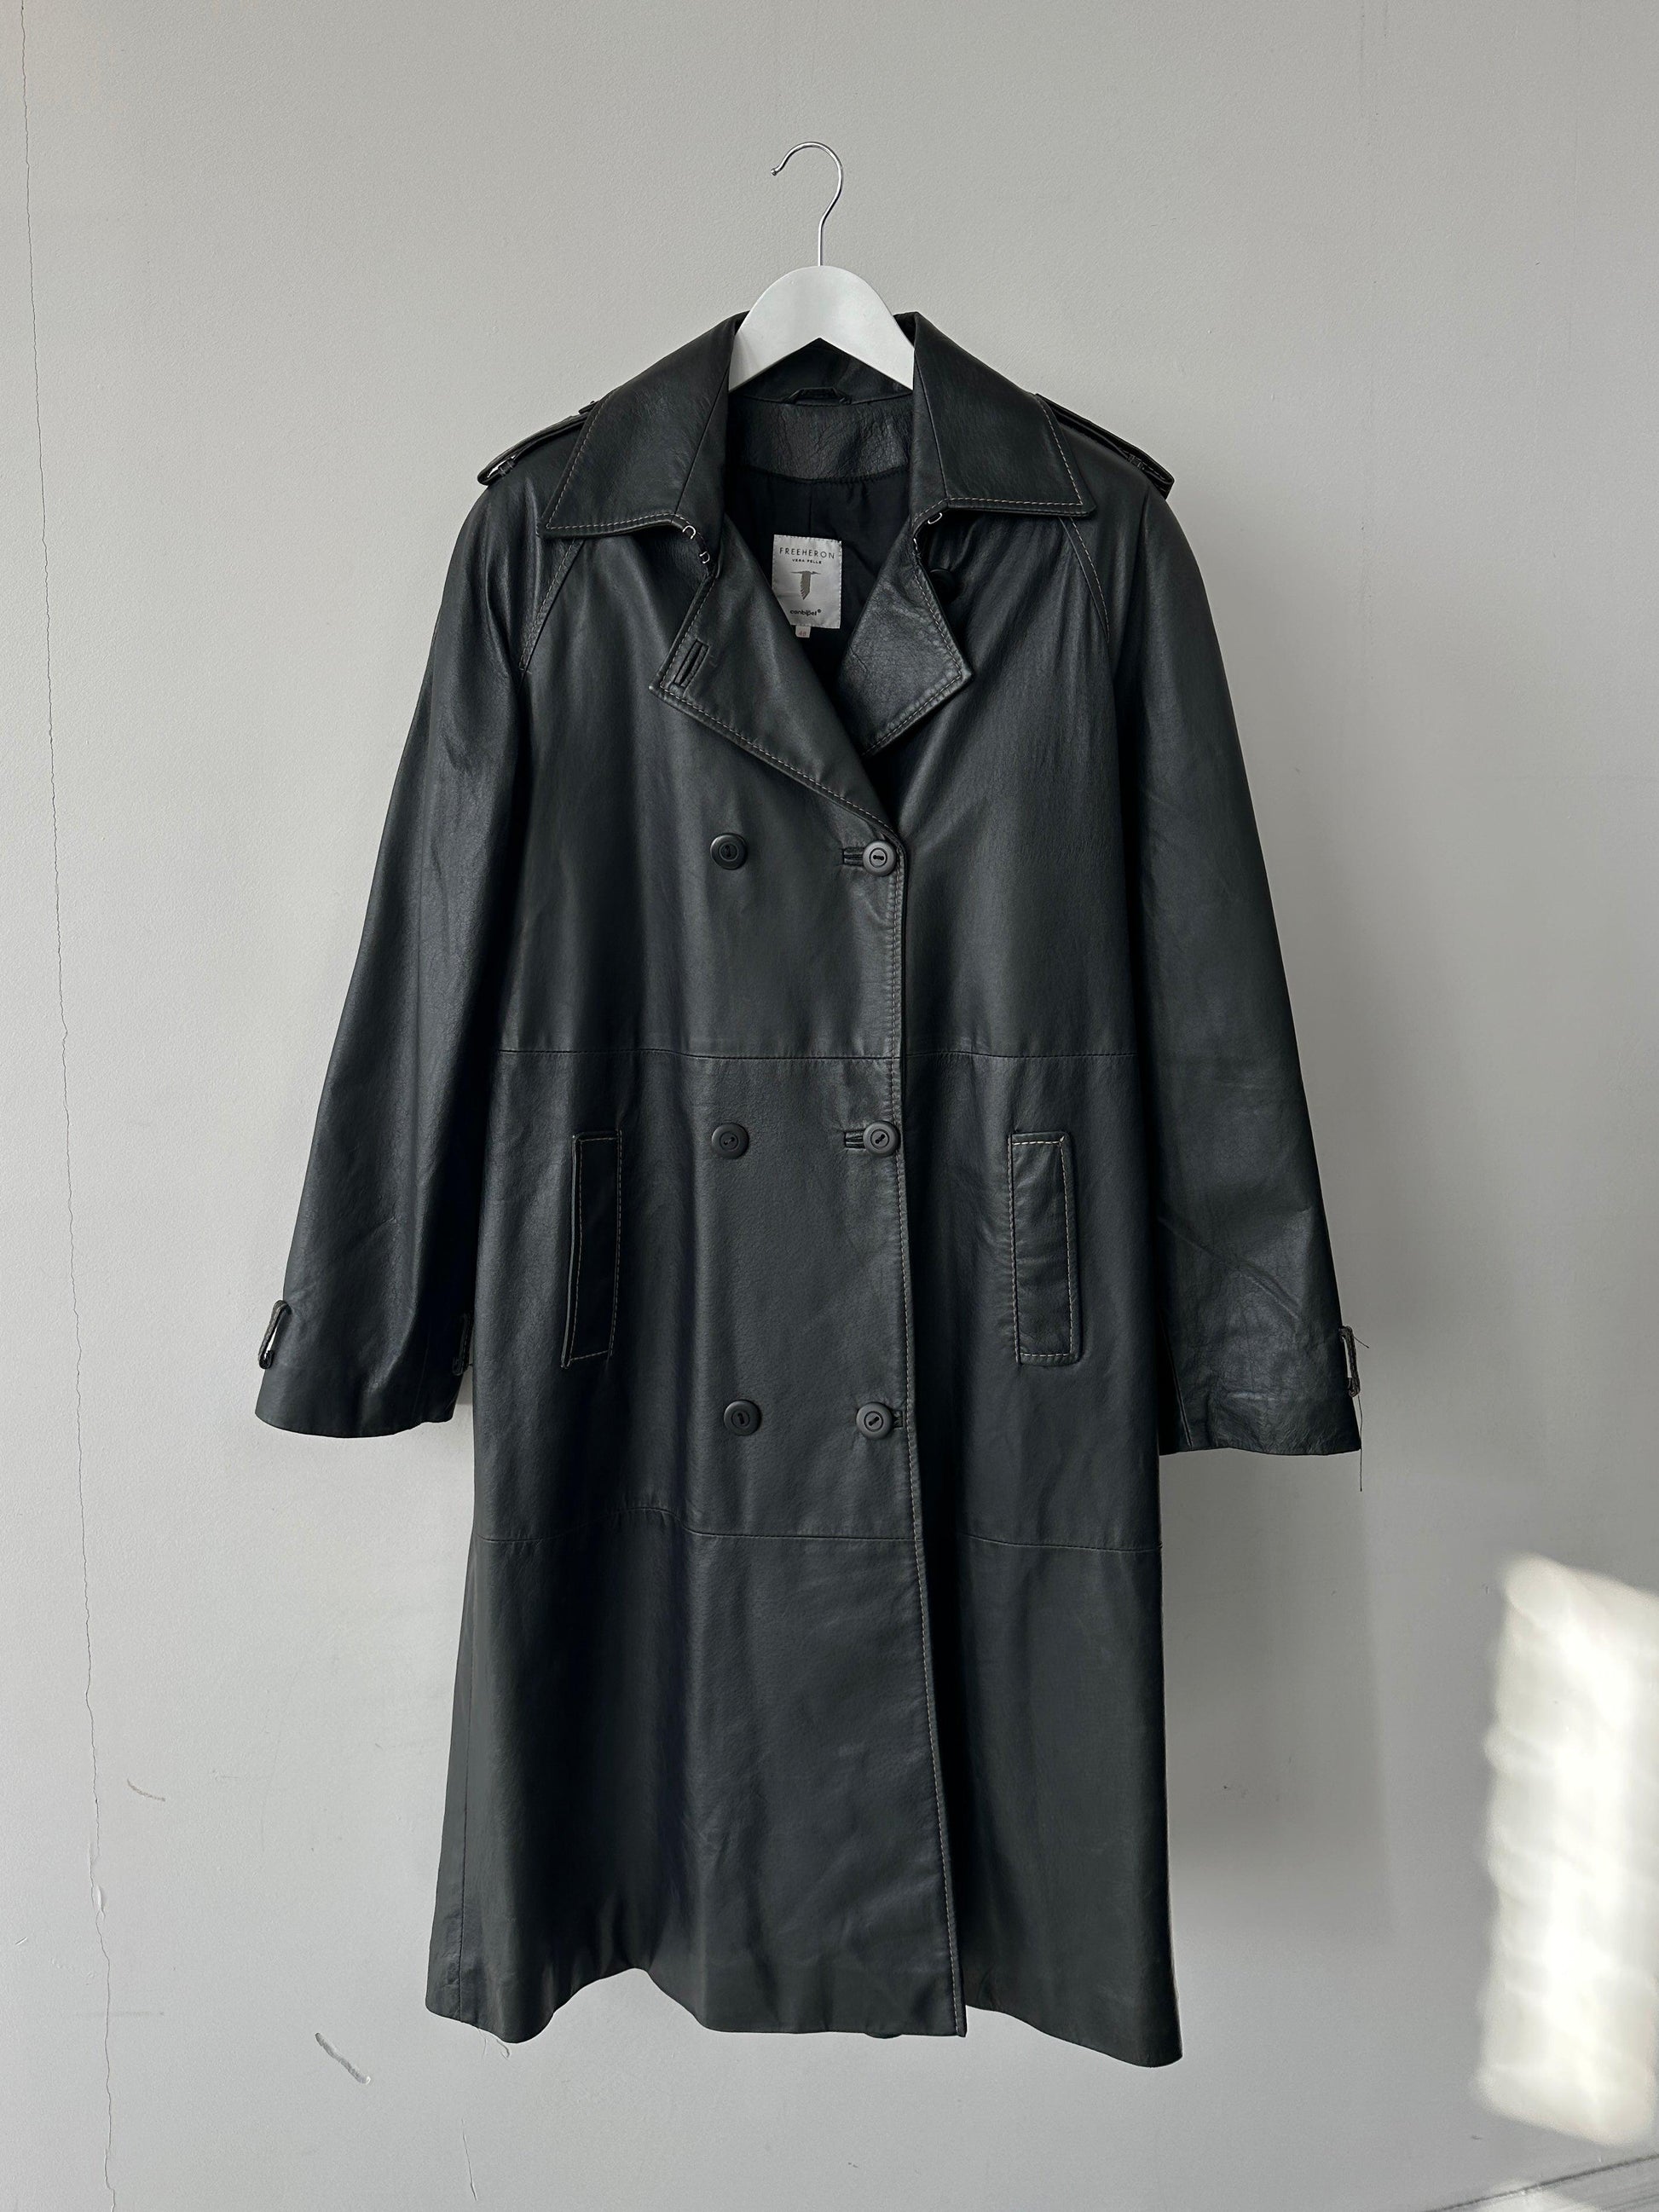 Conbipel Contrast Stitch Double Breasted Leather Trench Coat - M - Known Source